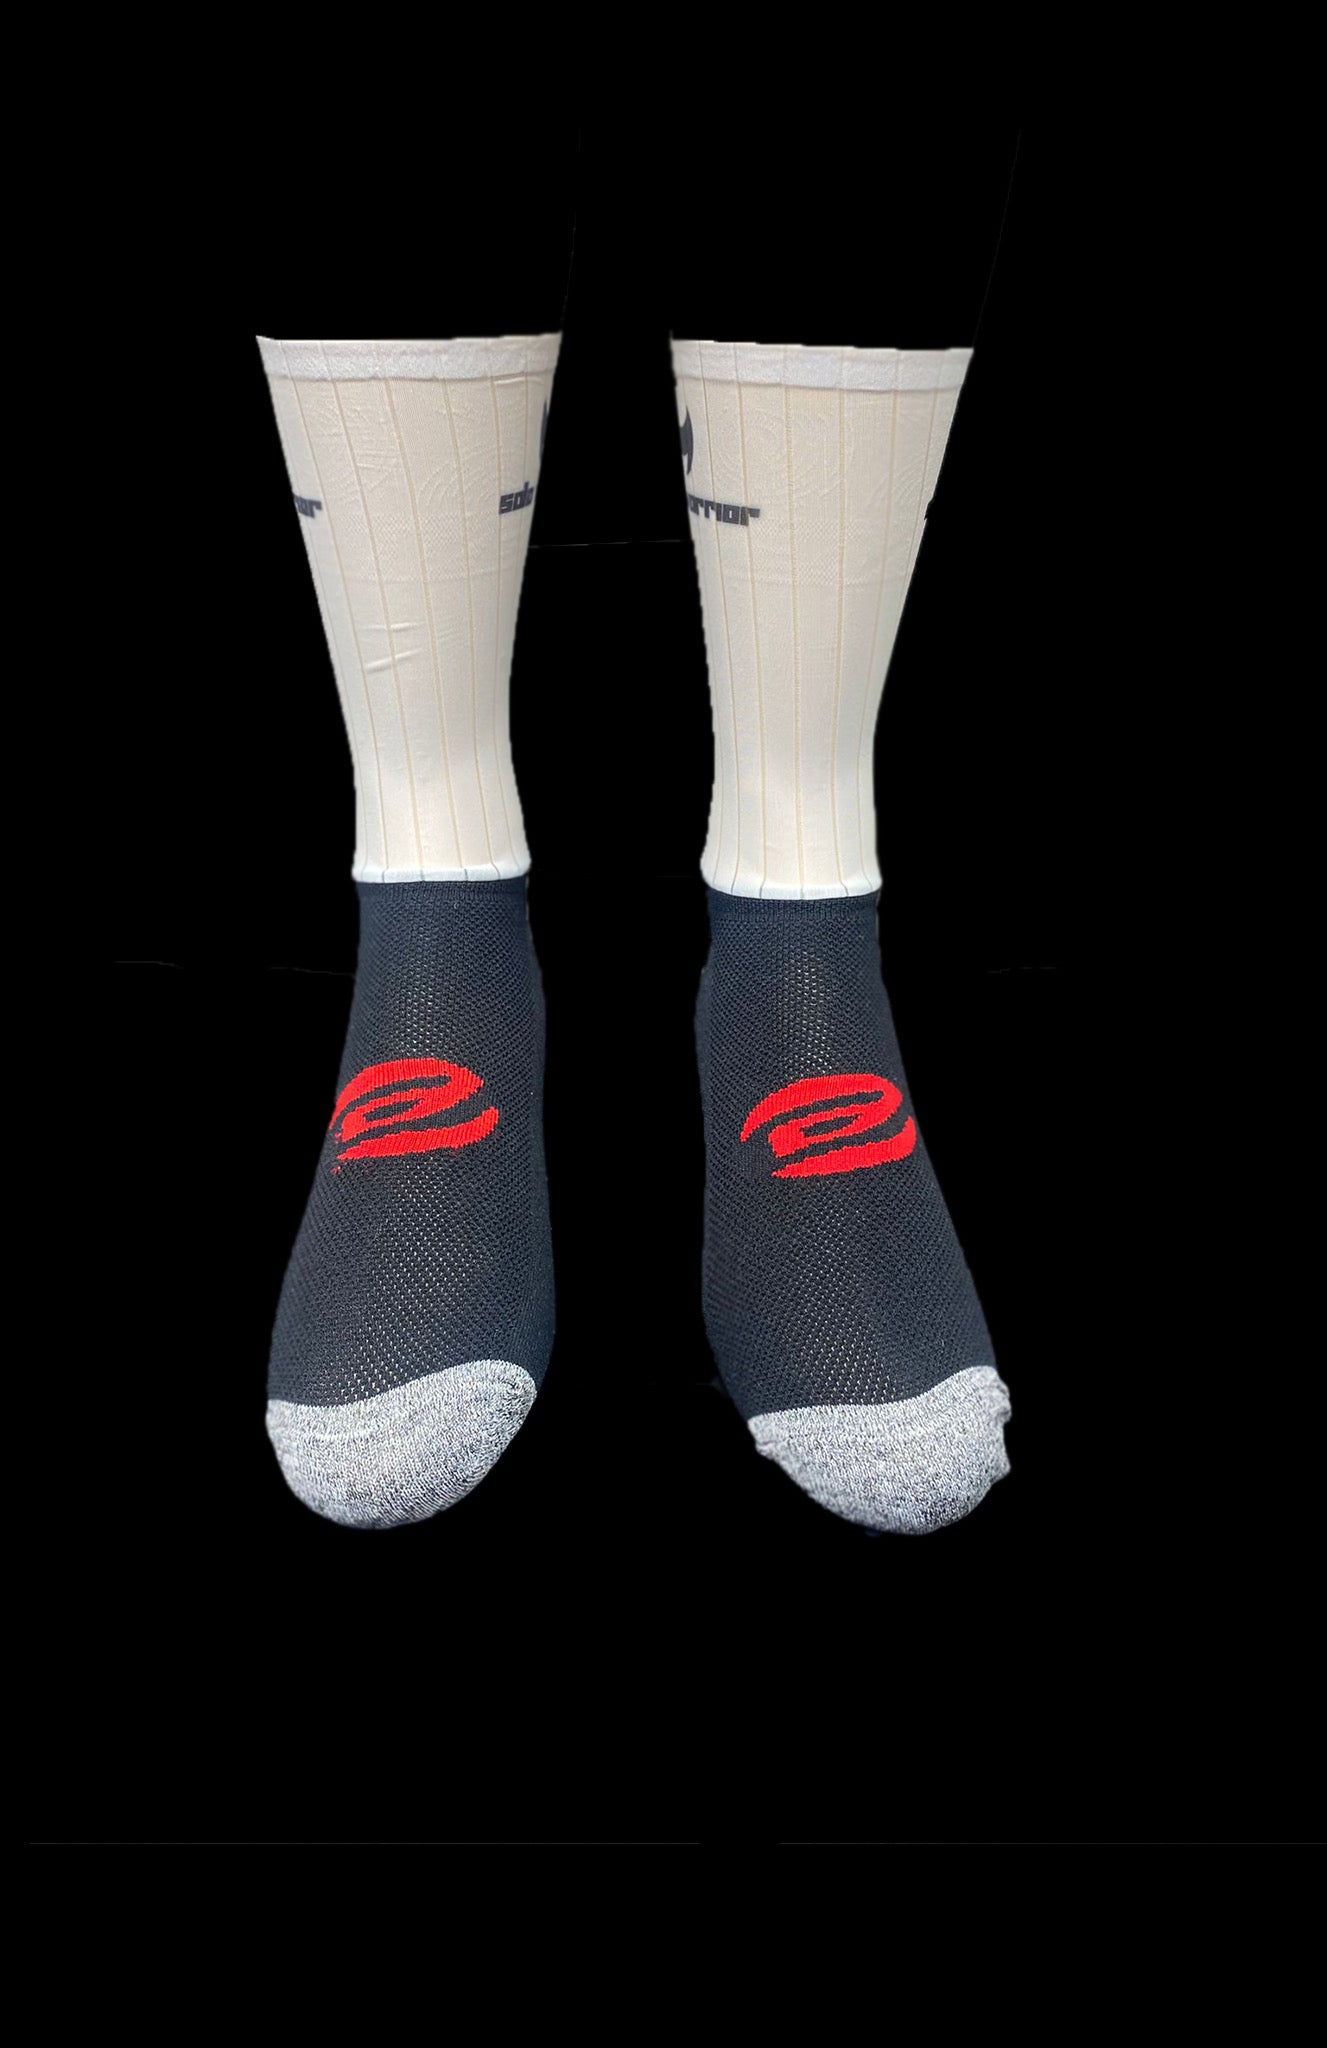 6” Solid White Aero cycling socks with compression.